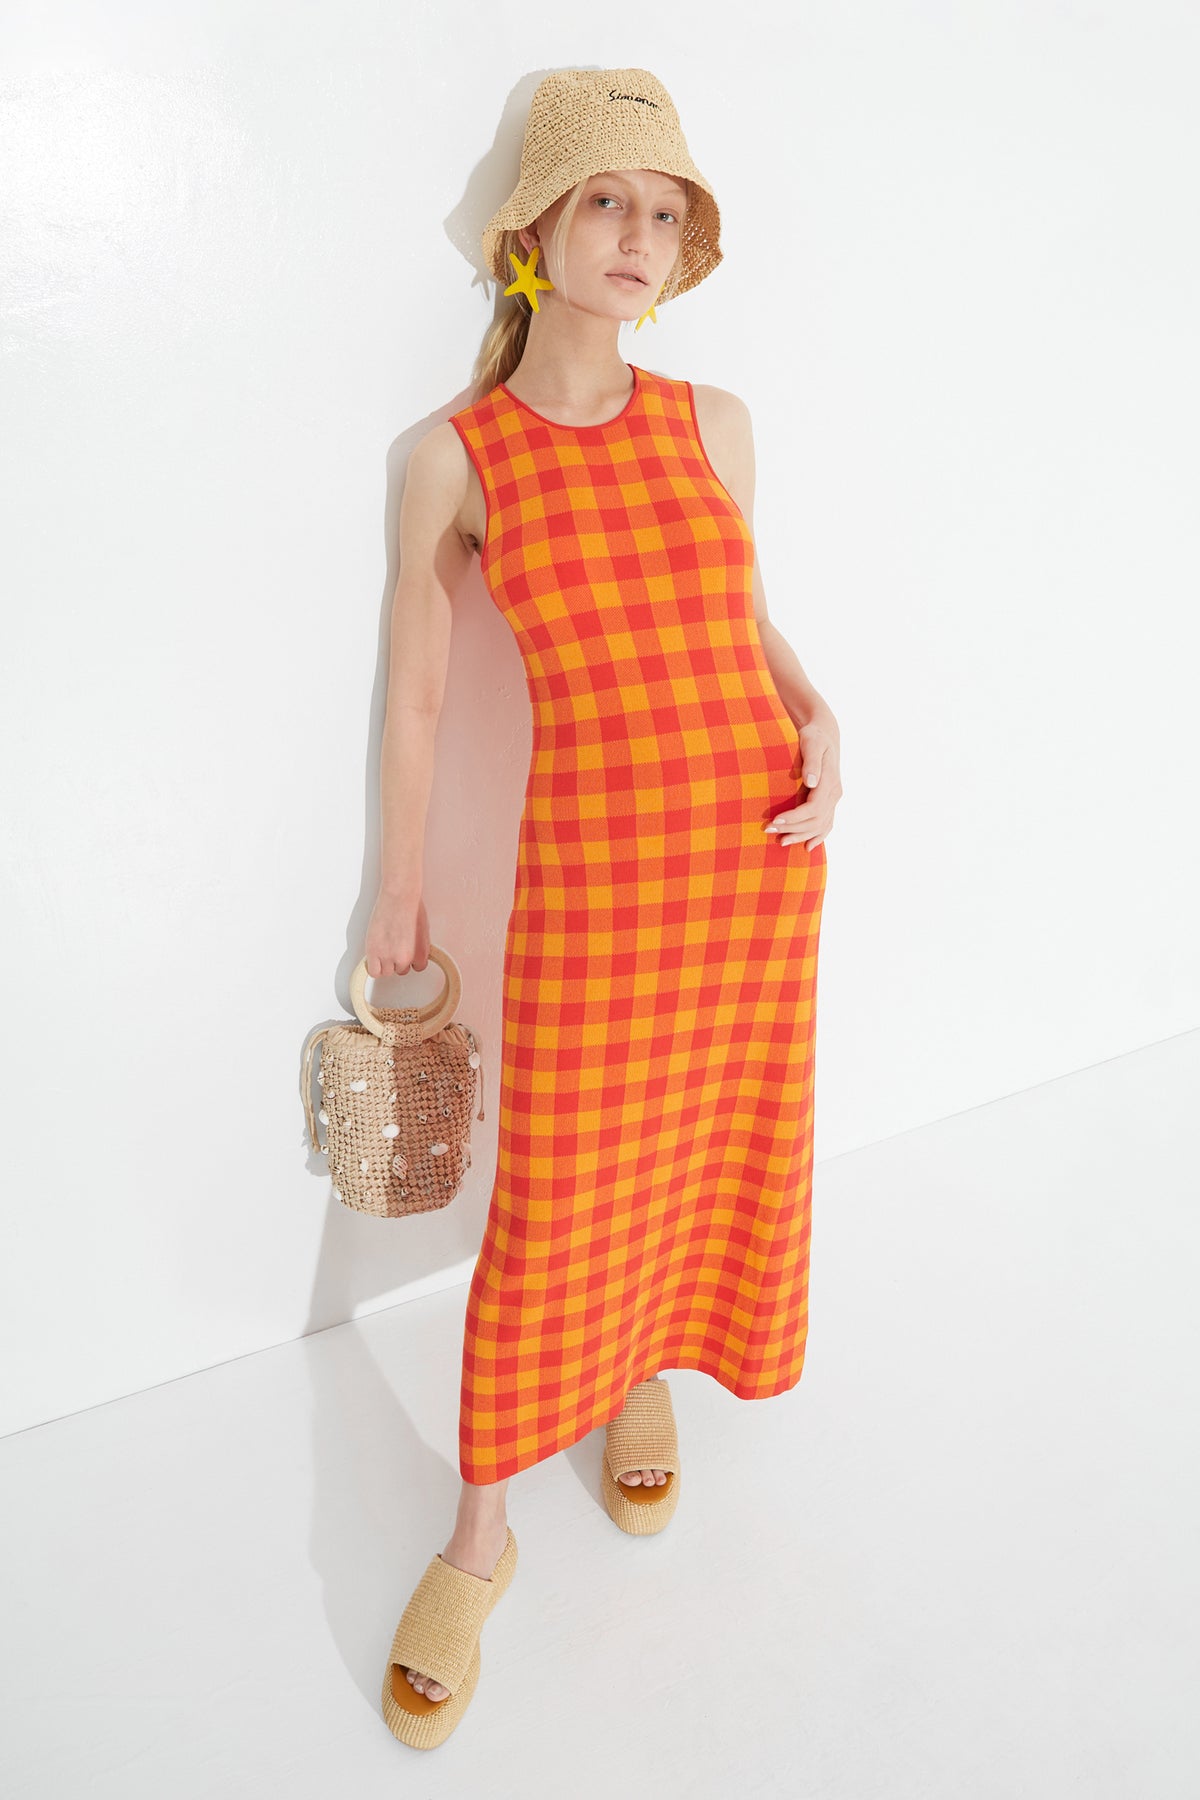 Knits By Axon Sleeveless Dress in Retro Red Gingham